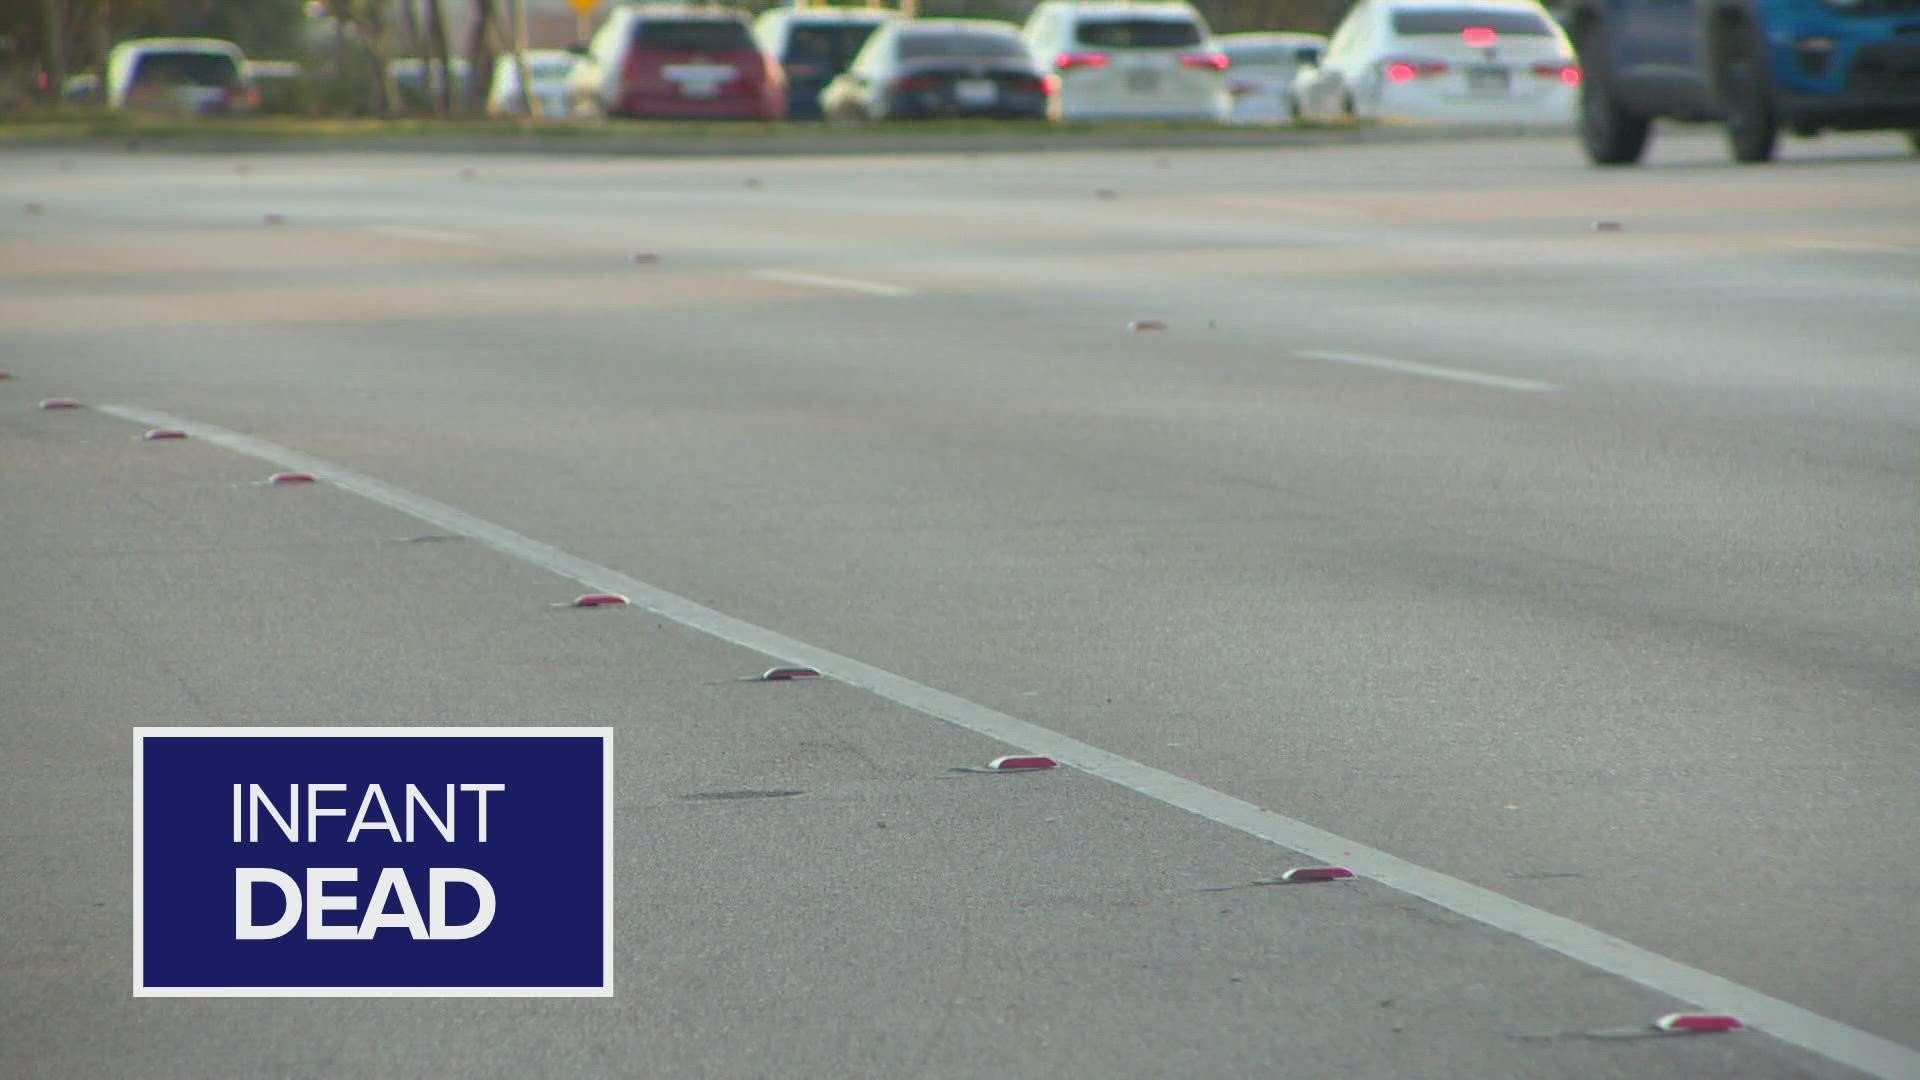 An investigation is underway after an infant fell out of a moving vehicle and was then hit by another car in Irving Sunday, police said.